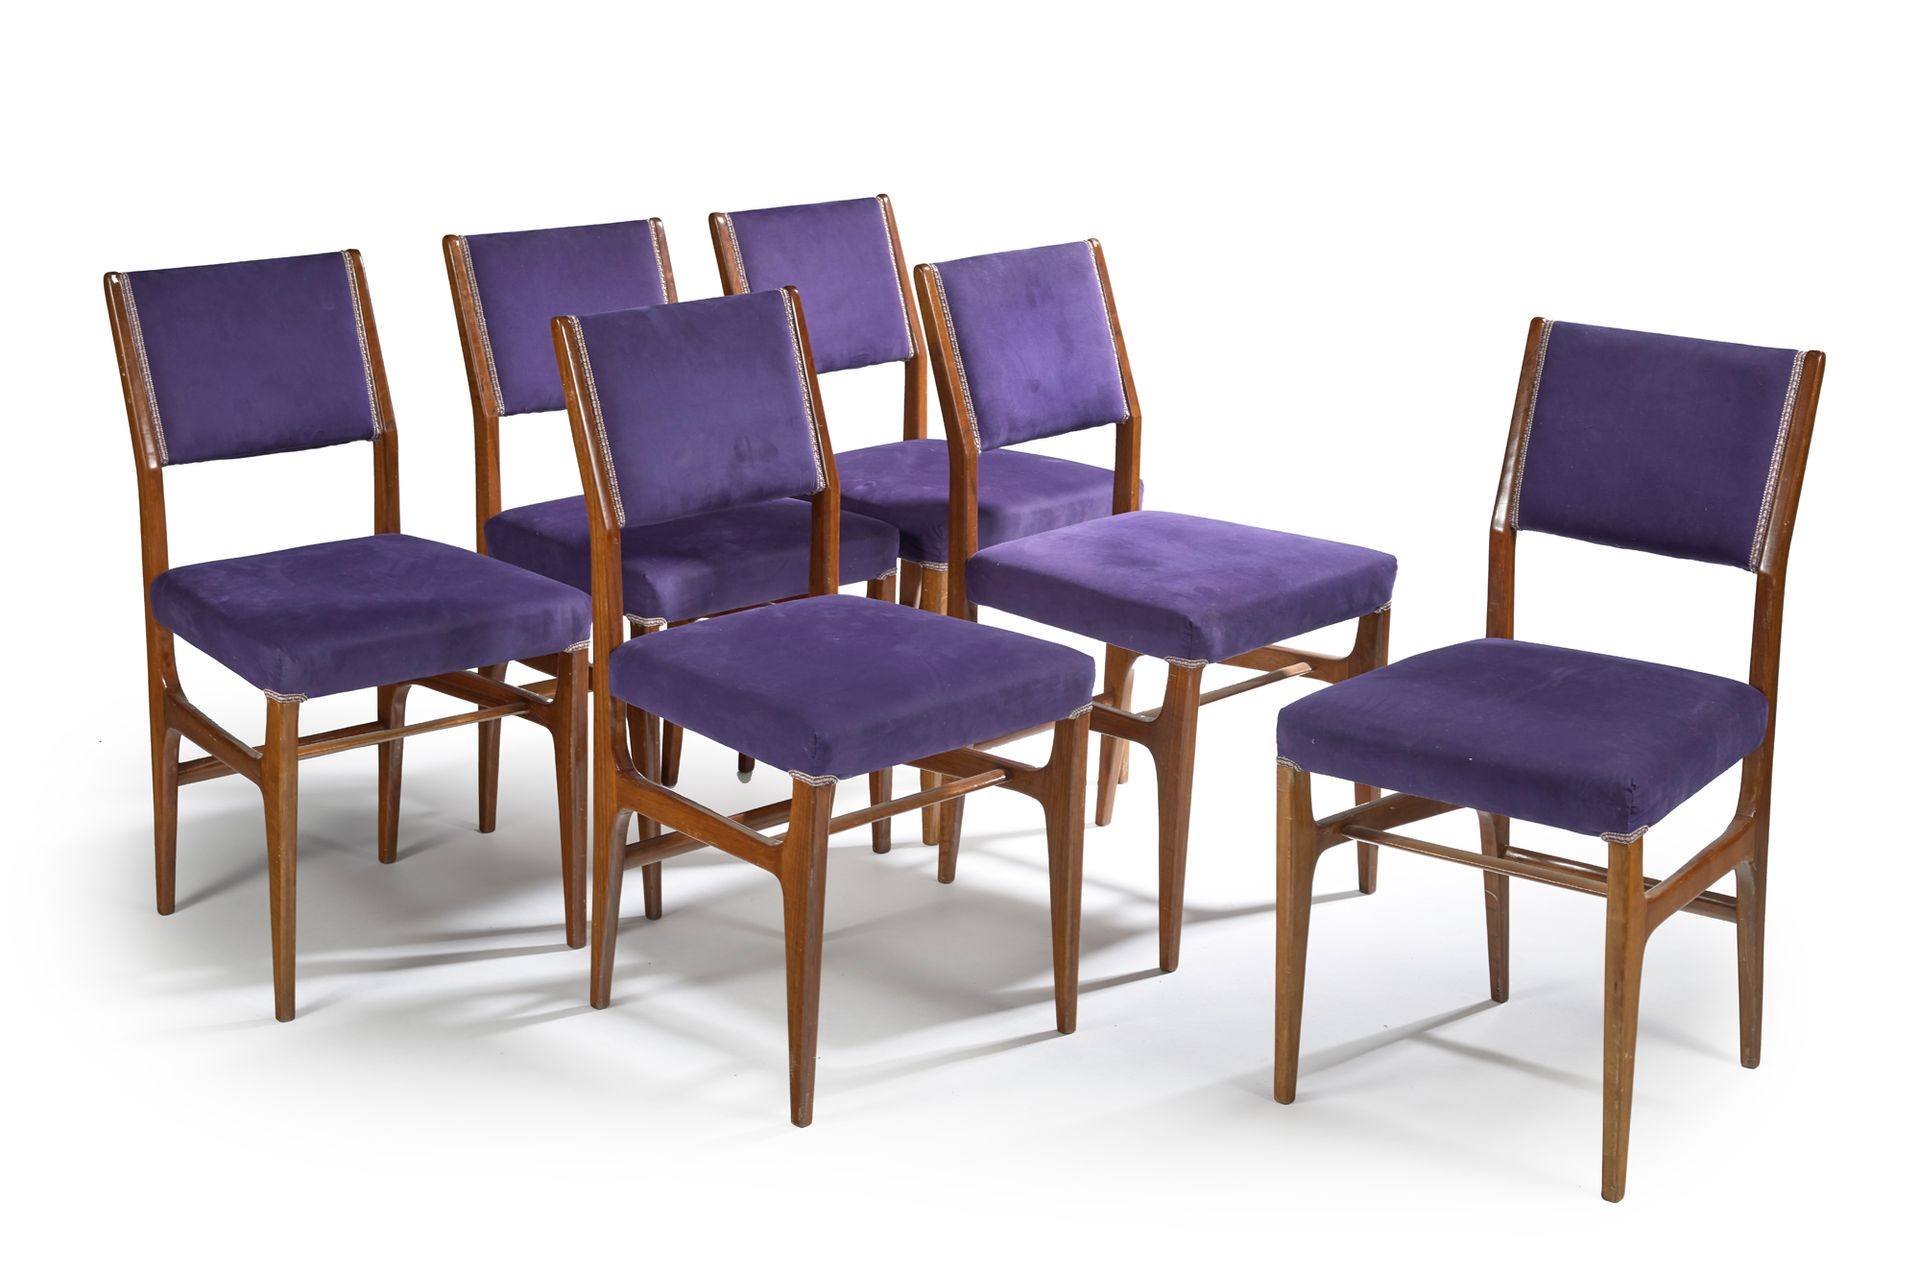 Gio PONTI (1891-1979) Suite of six chairs in varnished wood, purple velvet uphol&hellip;